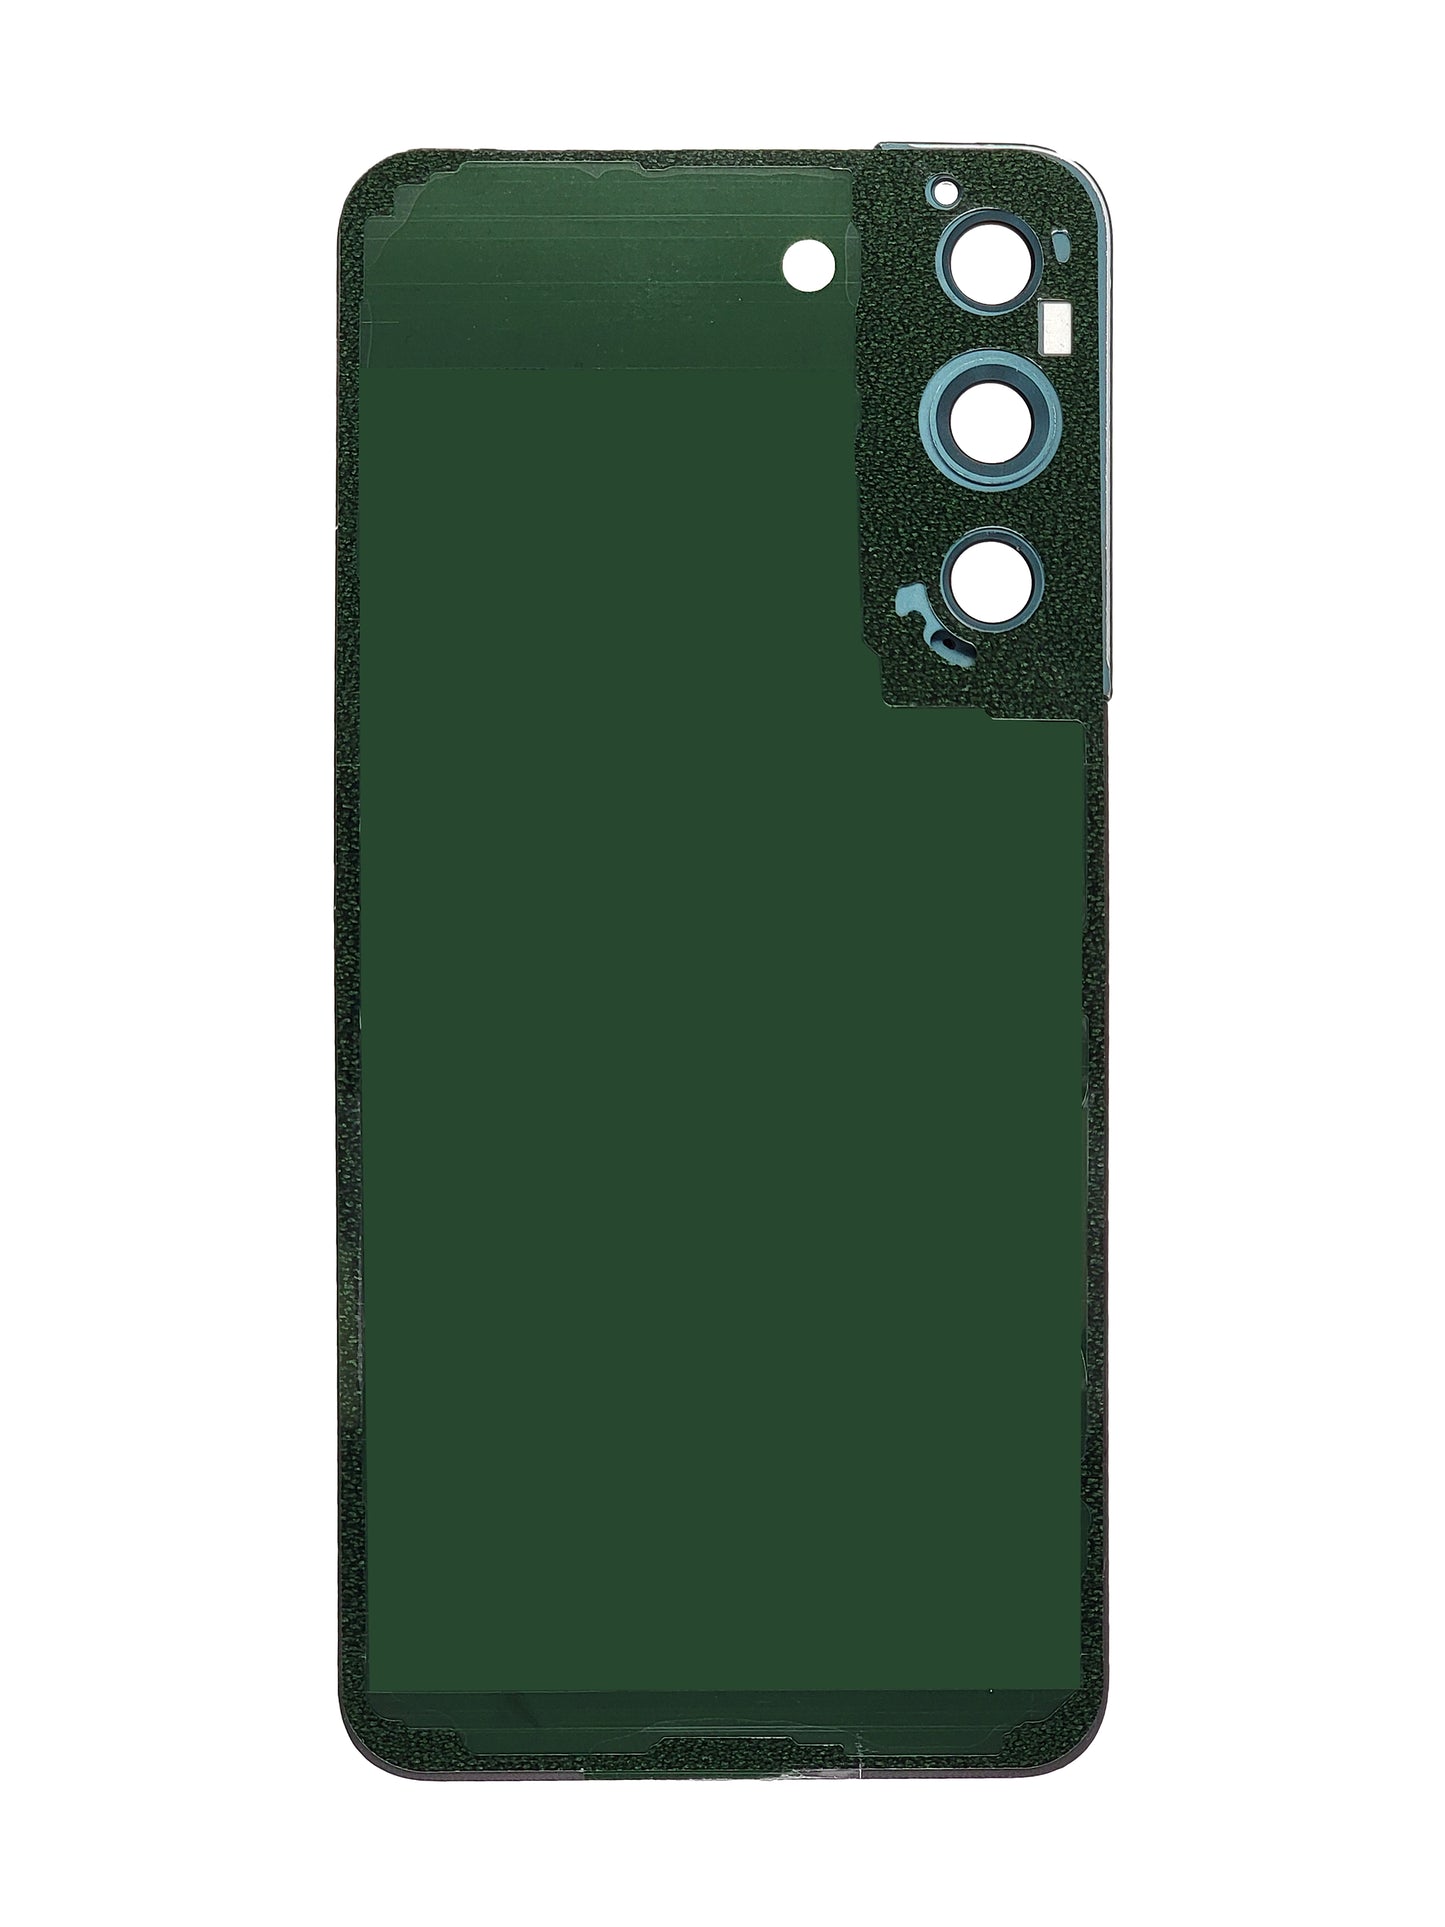 SGS S22 Back Cover (Green)